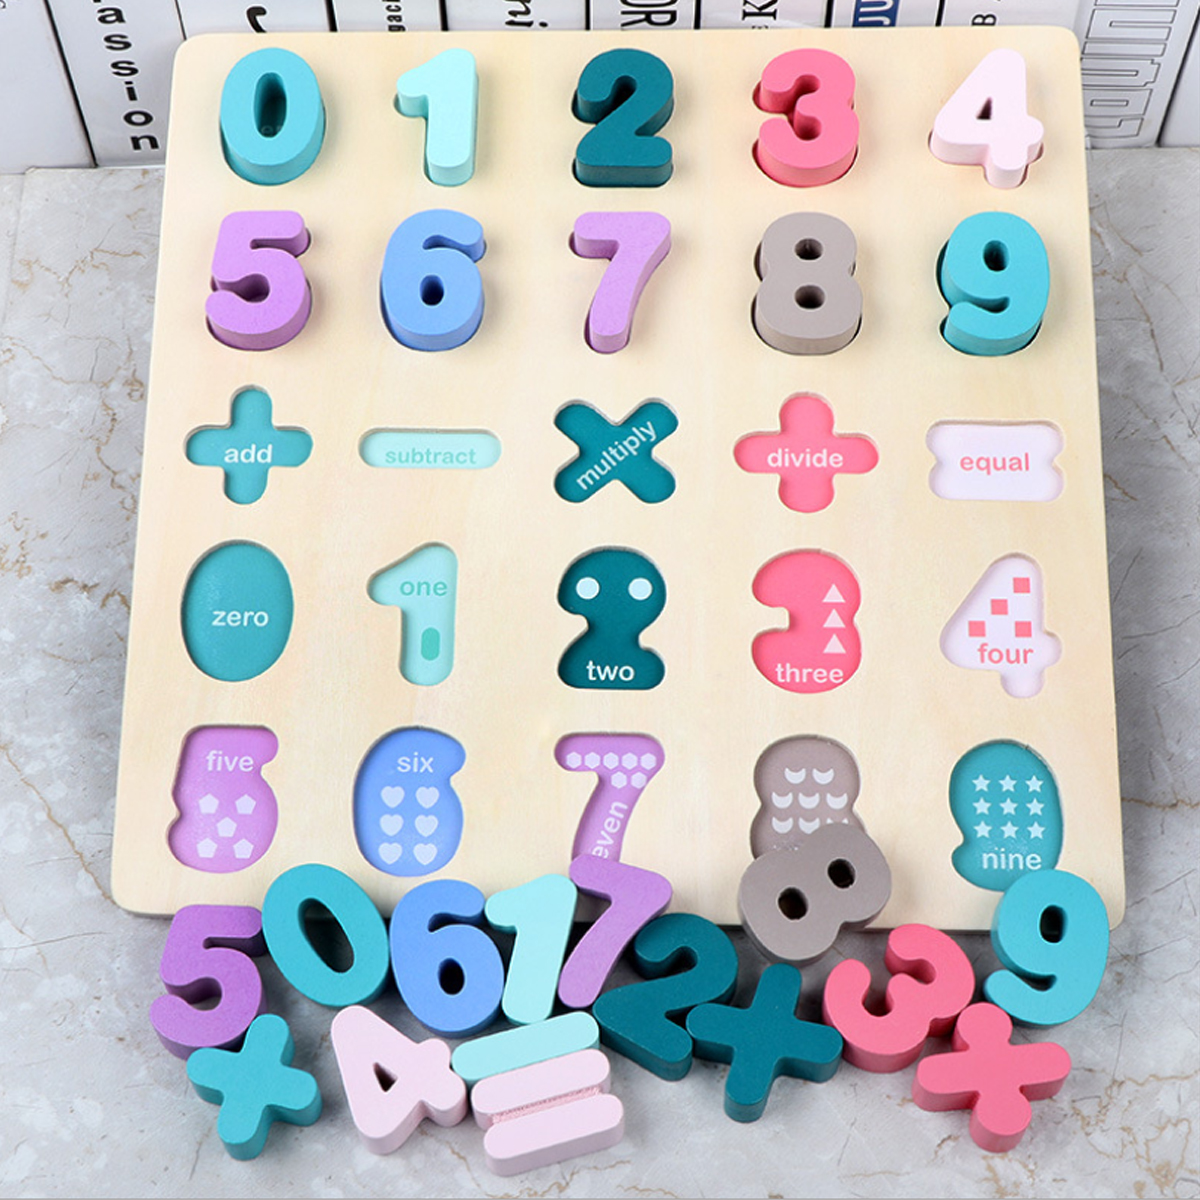 Alphanumeric-Board-Wooden-Jigsaw-Volume-Wooden-Baby-Young-Children-Early-Education-Educational-Toys-1635558-1